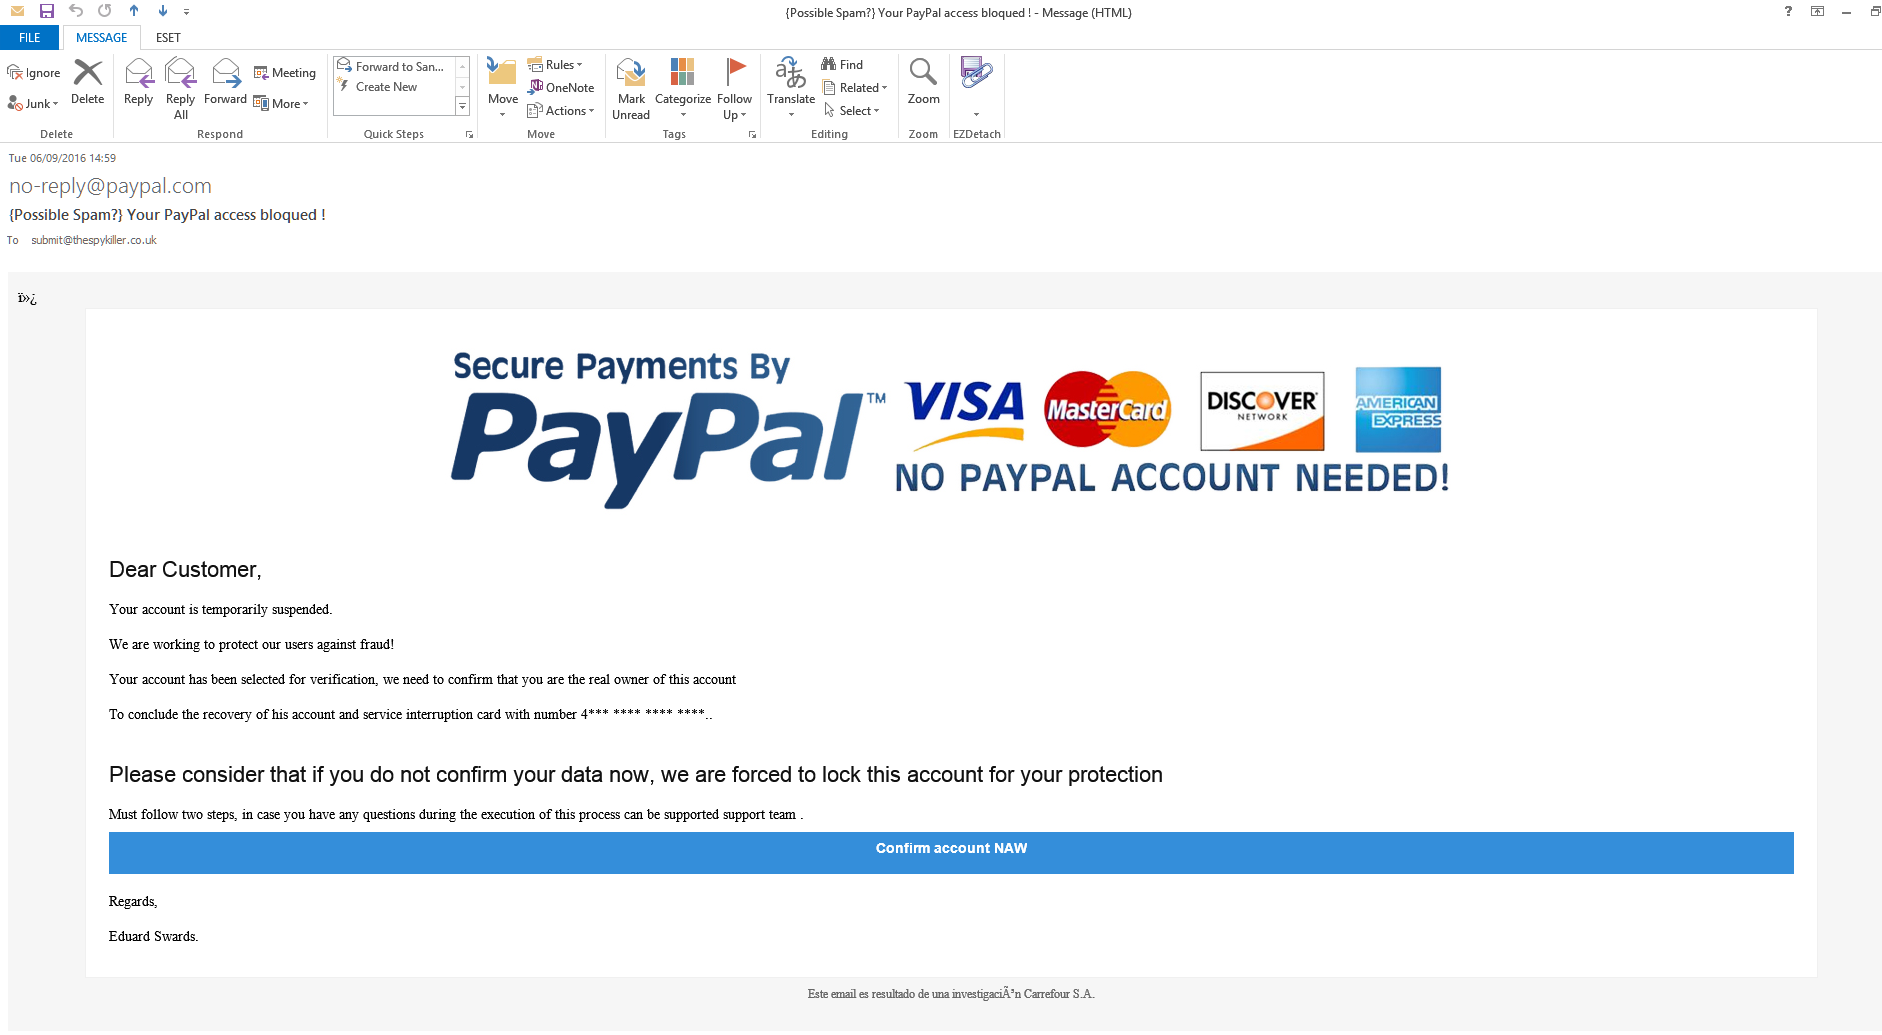 Your PayPal access bloqued